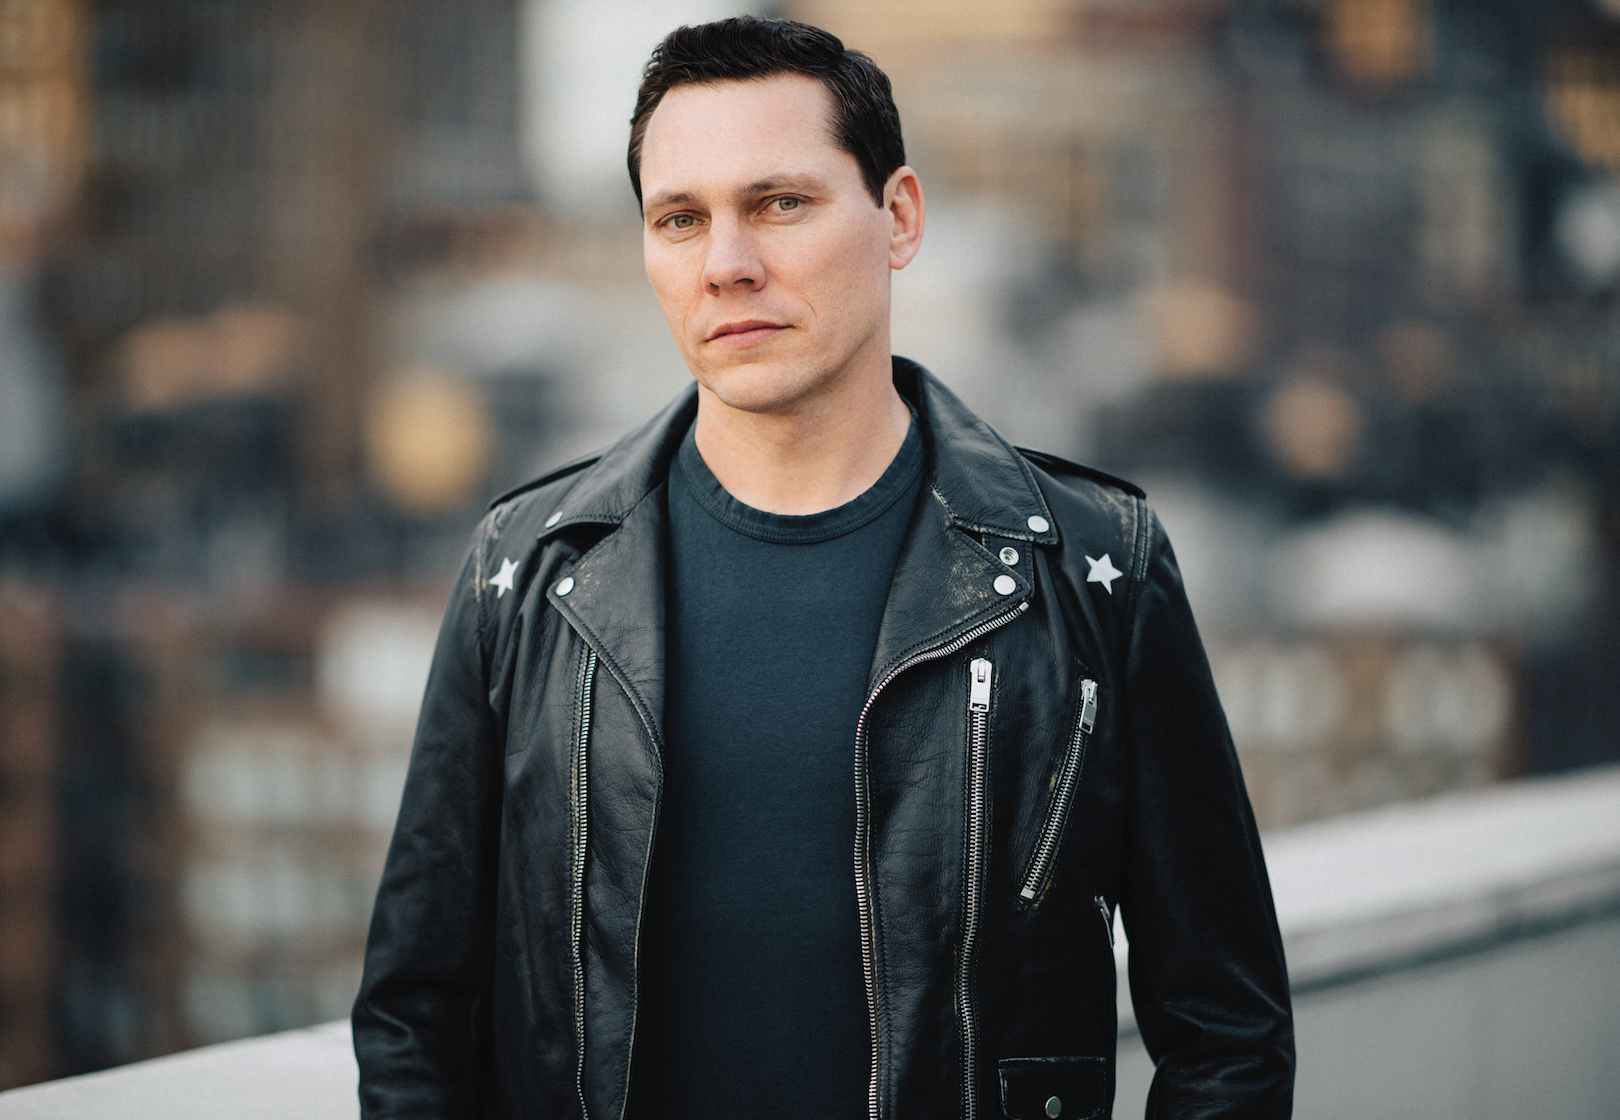 Tiesto: 'If I look at my life for the last 25 years, I’ve been partying and hanging out in clubs, and everything looks very young, so I guess that keeps me young too!'